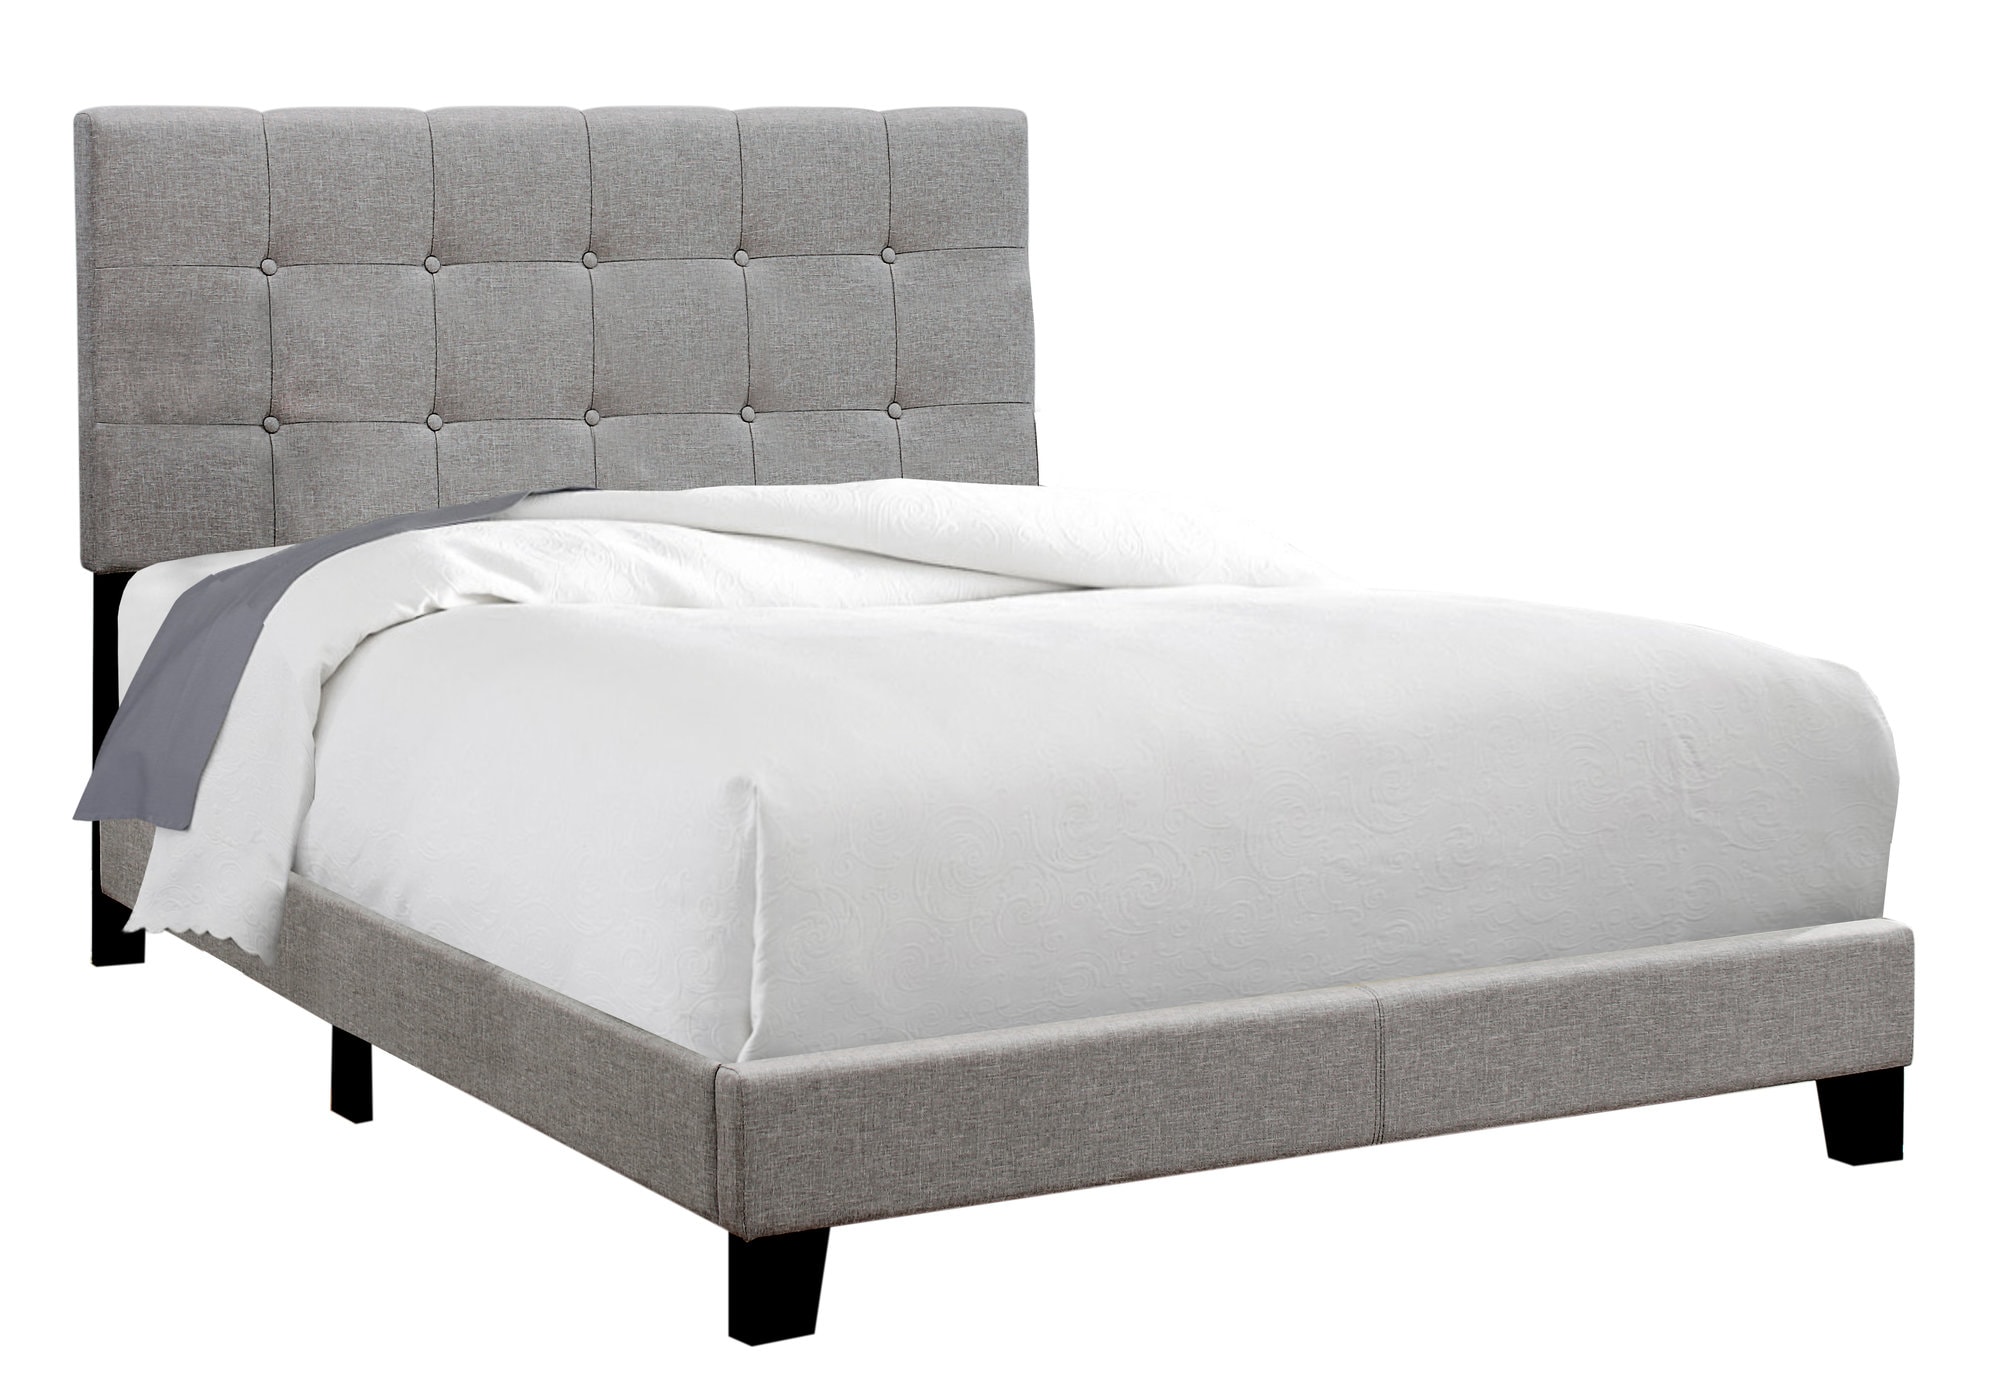 Monarch Specialties Bed Full Size, Full Size Bed Frame Size